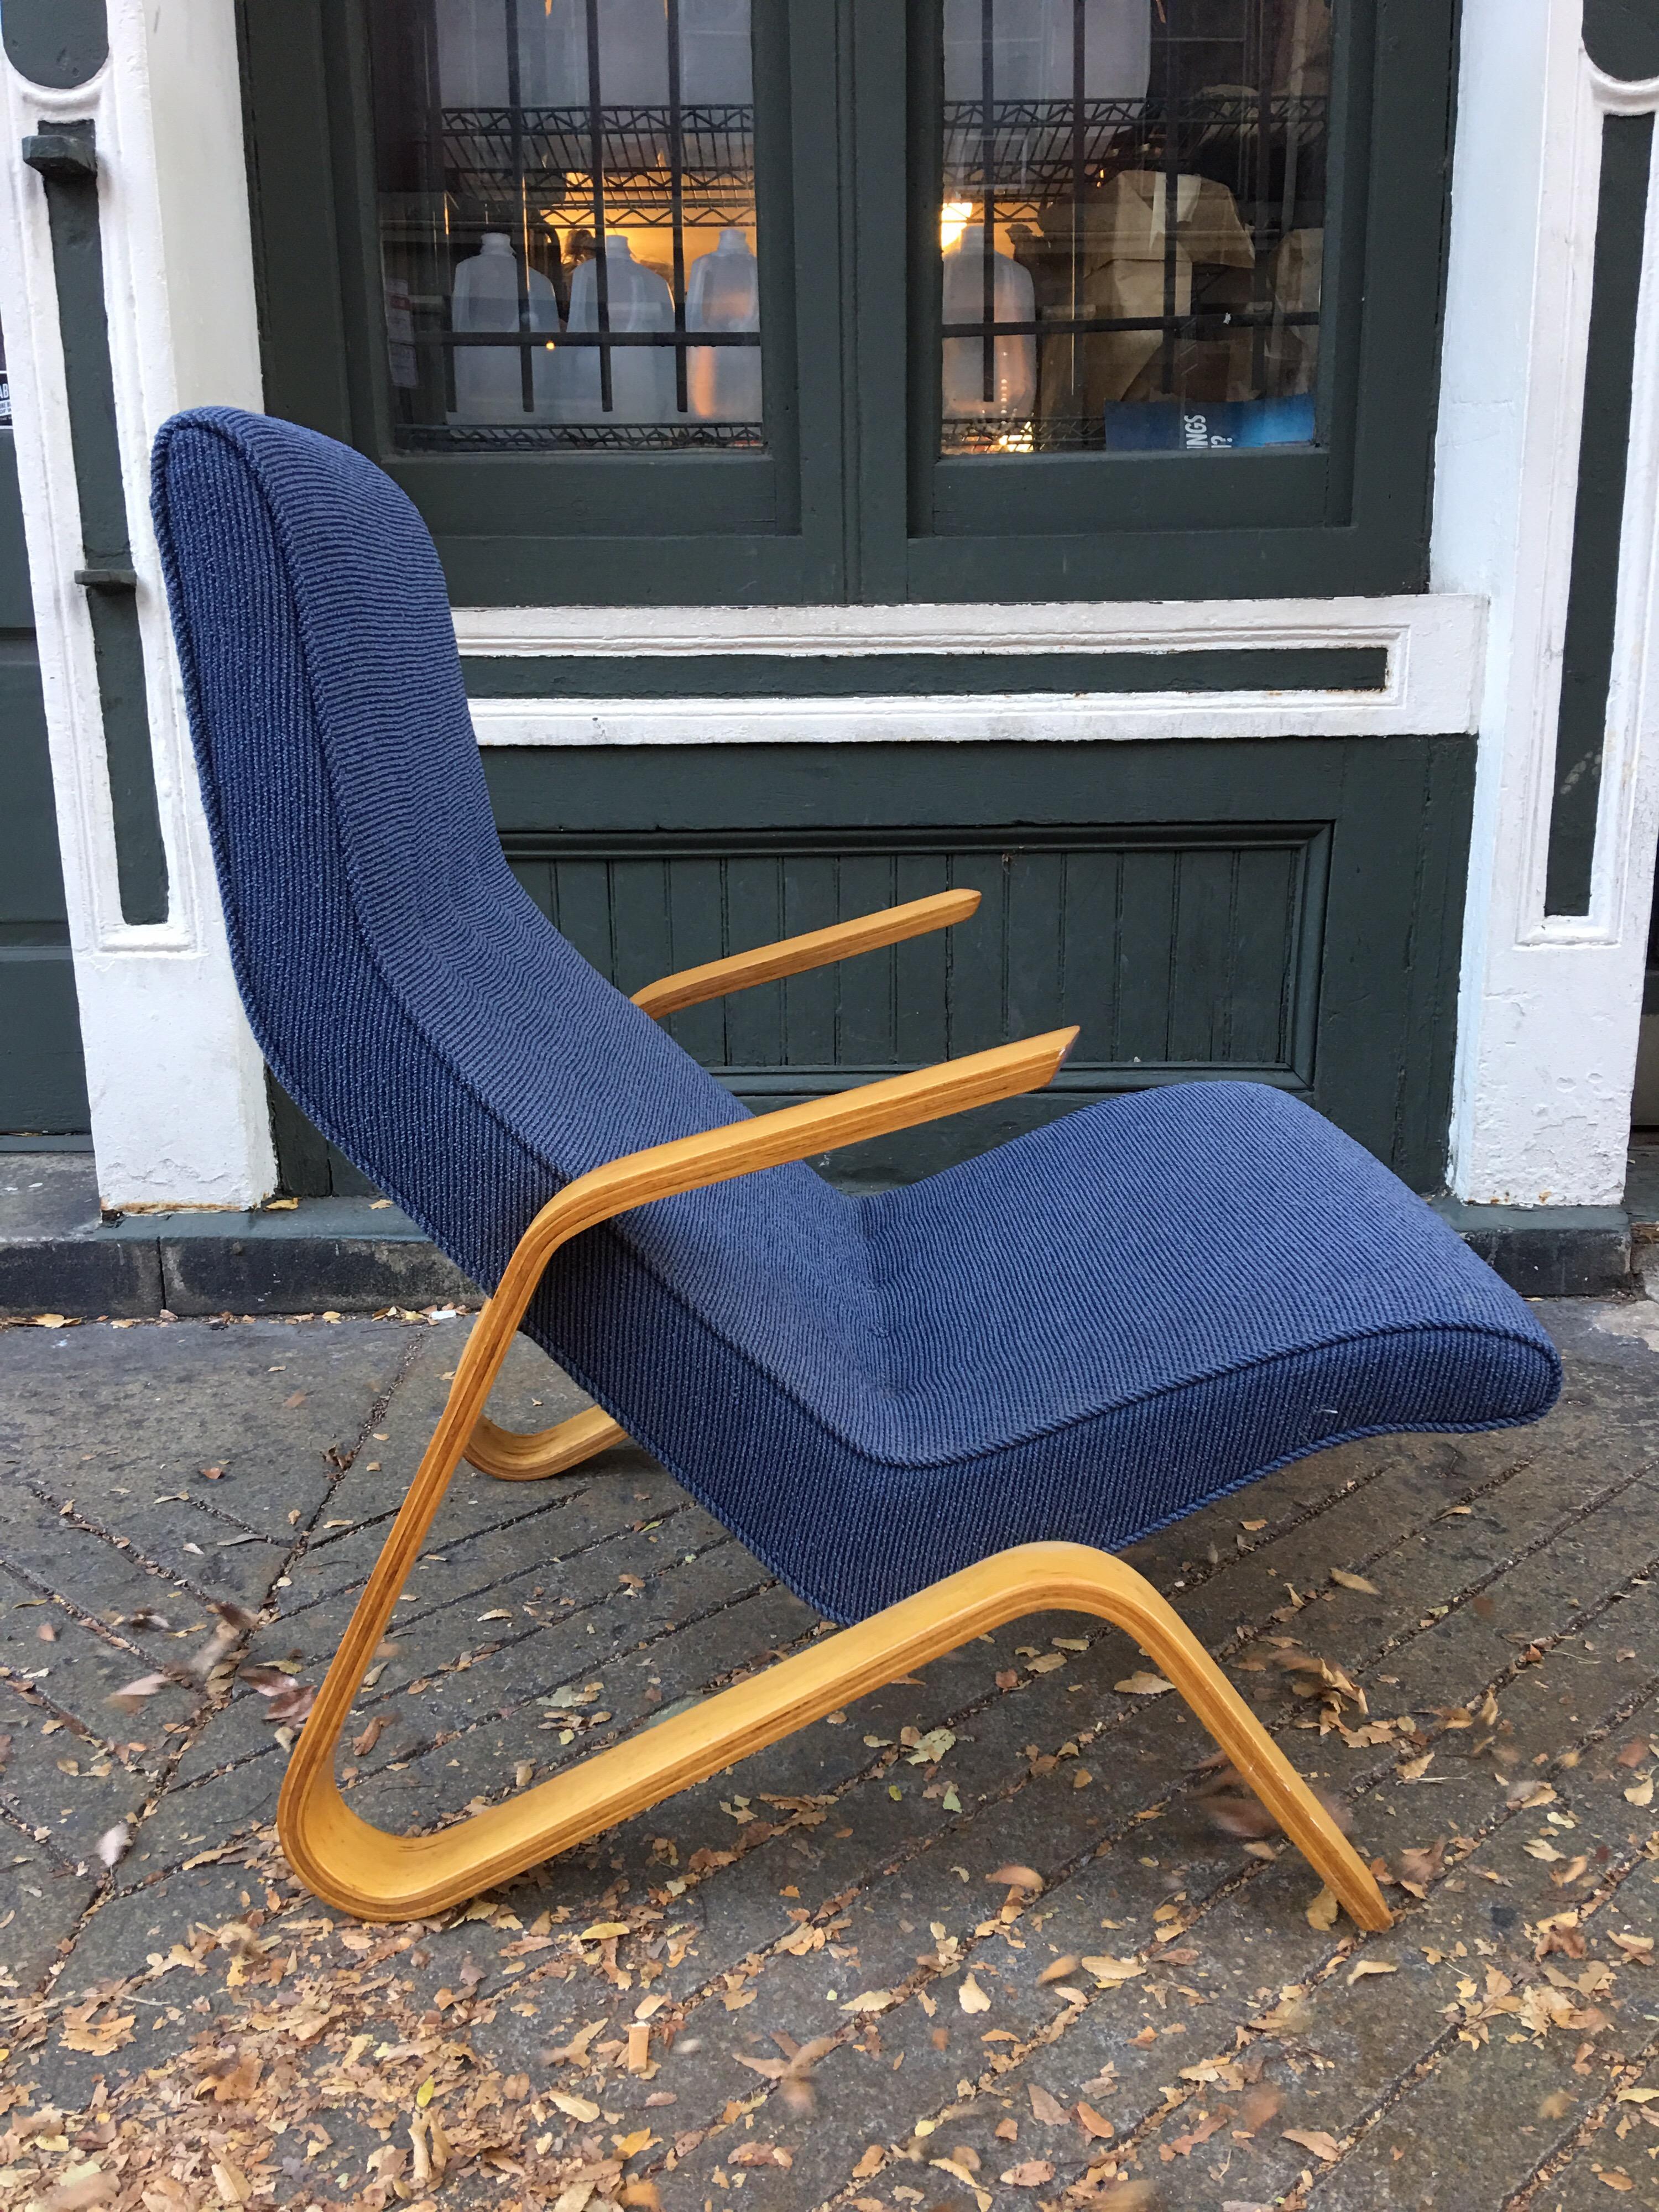 Beautiful Saarinen grasshopper chair by Knoll. Upholstered in the last 5 years, chair shows no wear! One of the 1st chairs designed for the Knoll Company by Saarinen in 1946. This model dates from the 1950s. Blond birch bentwood arms and a